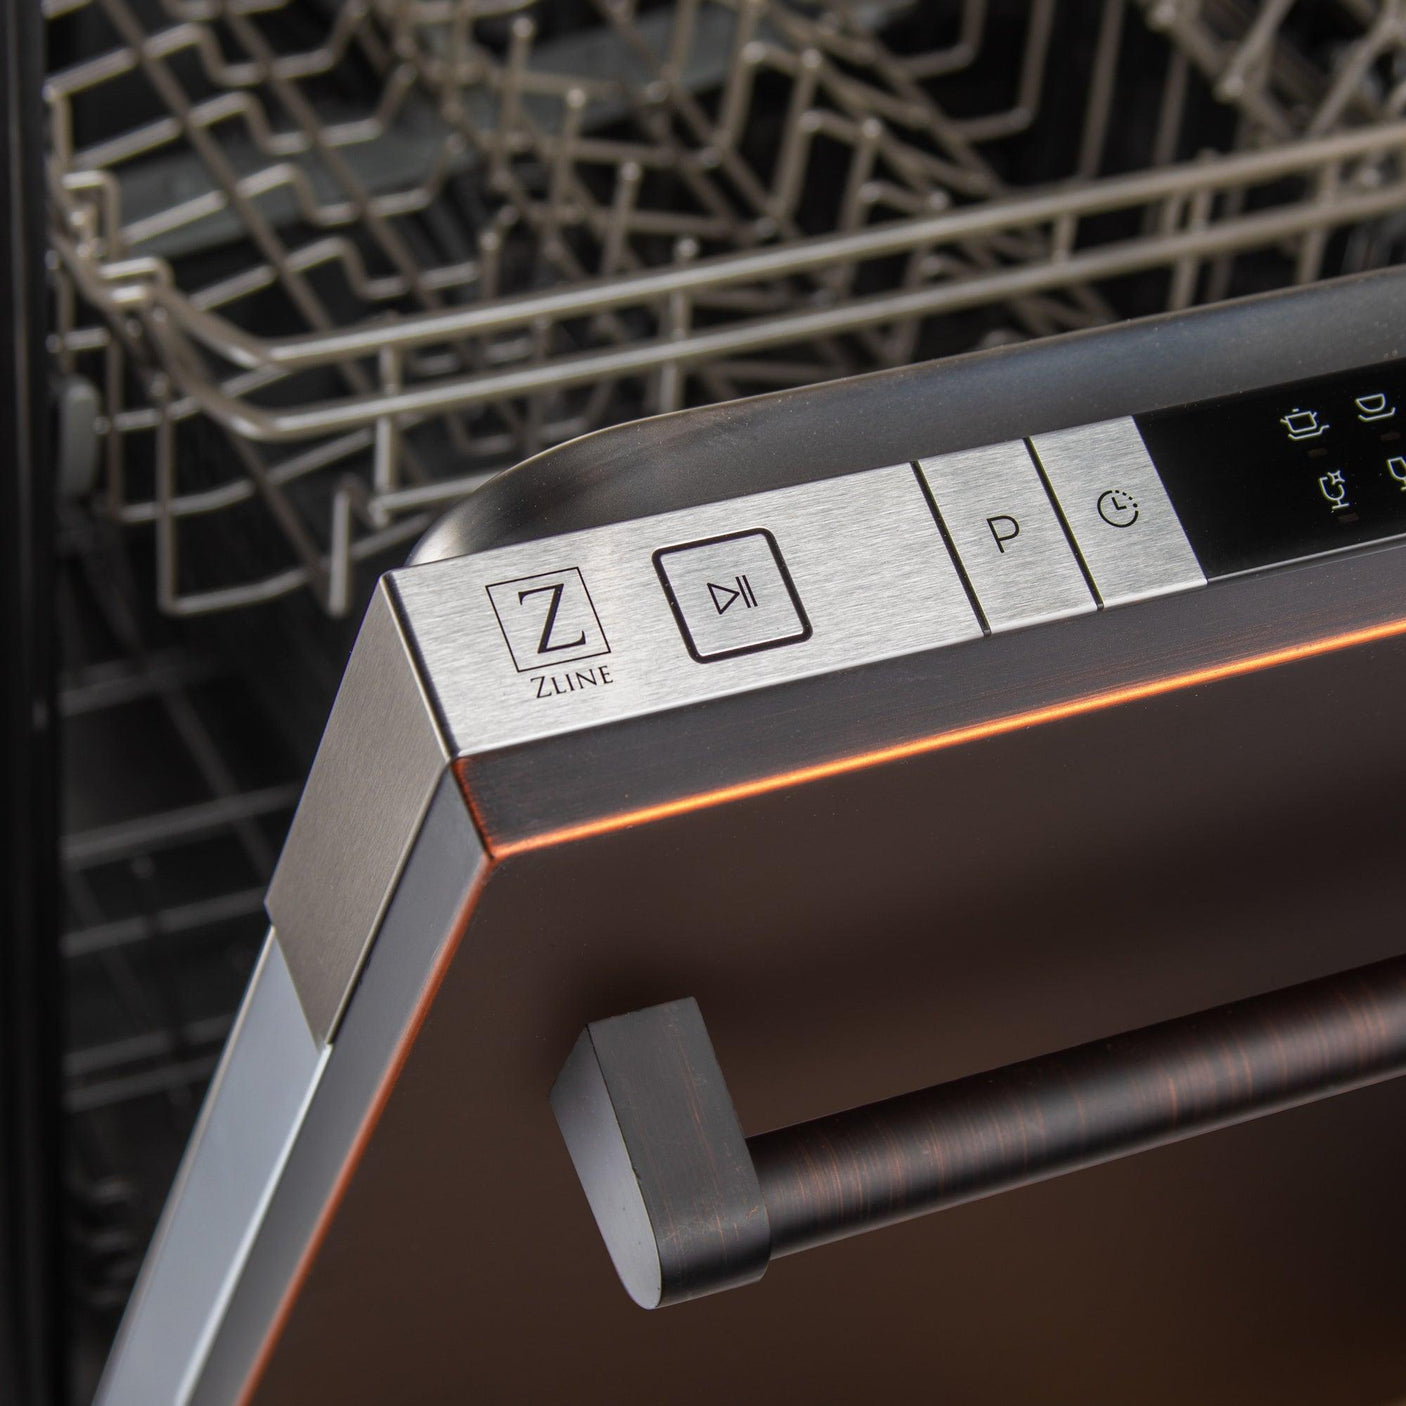 ZLINE 18 in. Compact Top Control Dishwasher with Stainless Steel Tub and Traditional Handle, 52dBa (DW-18) [Color: Oil Rubbed Bronze]